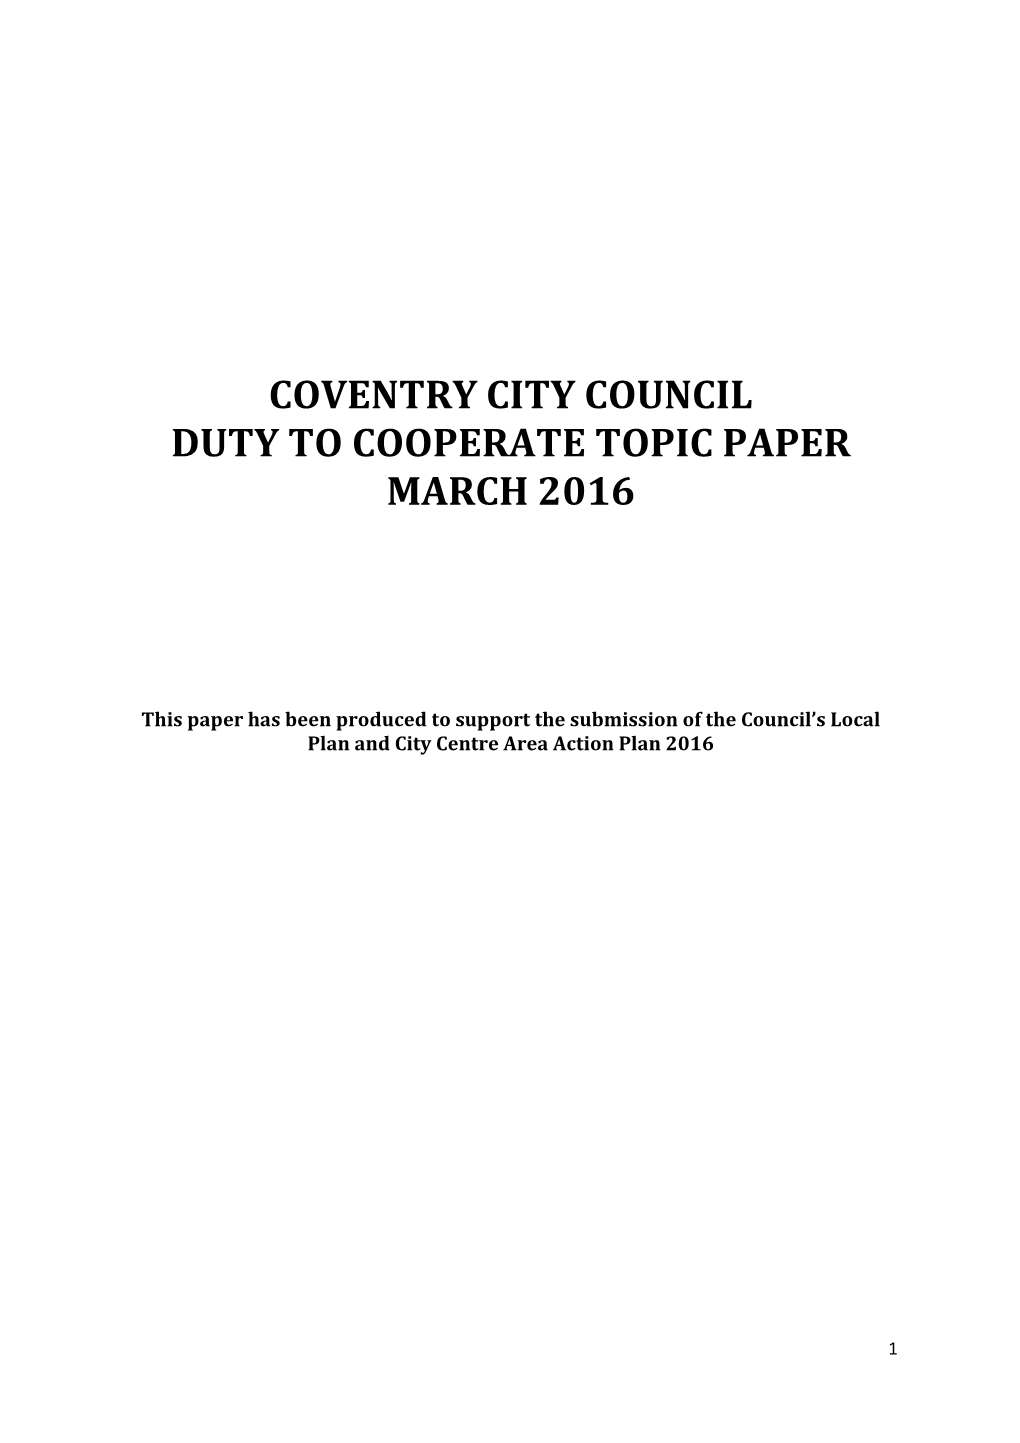 Coventry City Council Duty to Cooperate Topic Paper March 2016